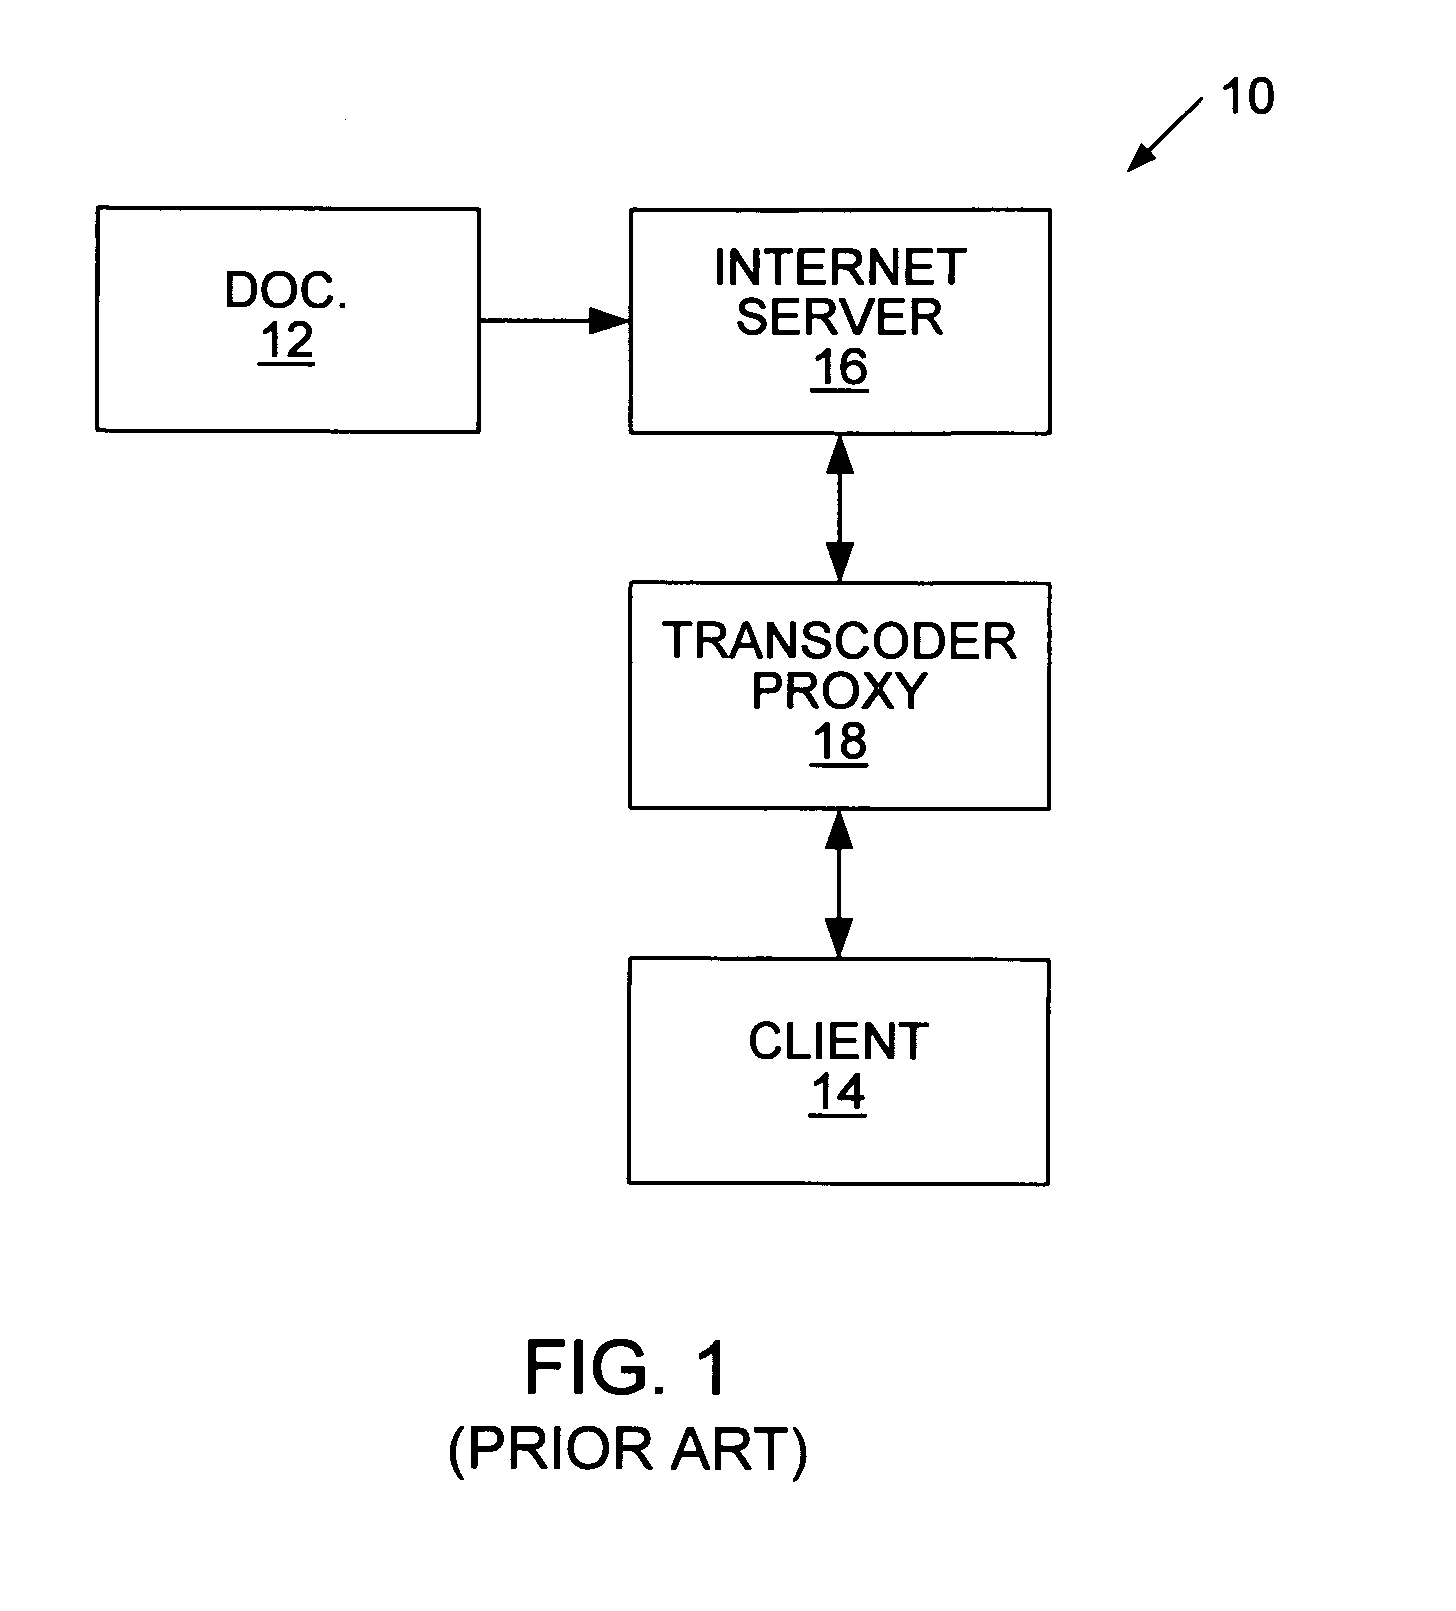 Electronic document delivery system employing distributed document object model (DOM) based transcoding and providing interactive javascript support